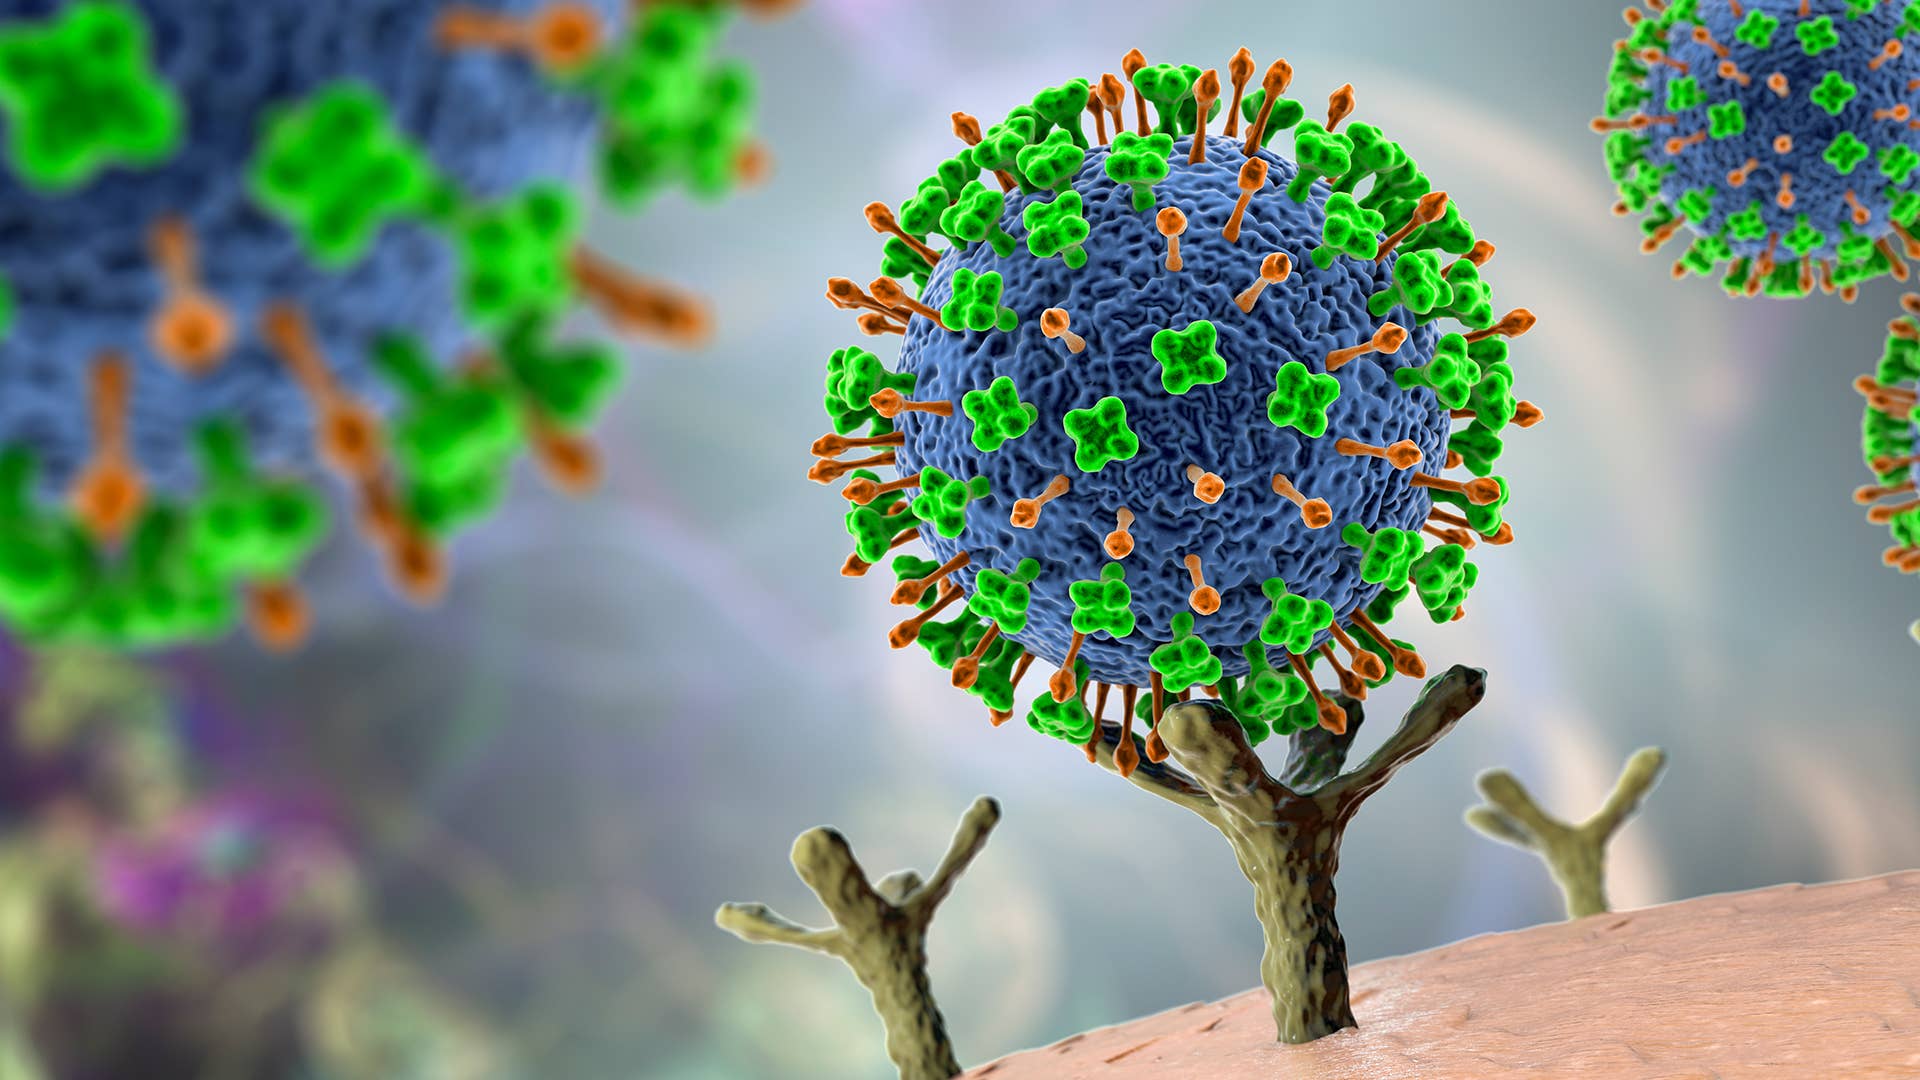 An illustration of a virus from Kateryna Kona and the Science Photo Library